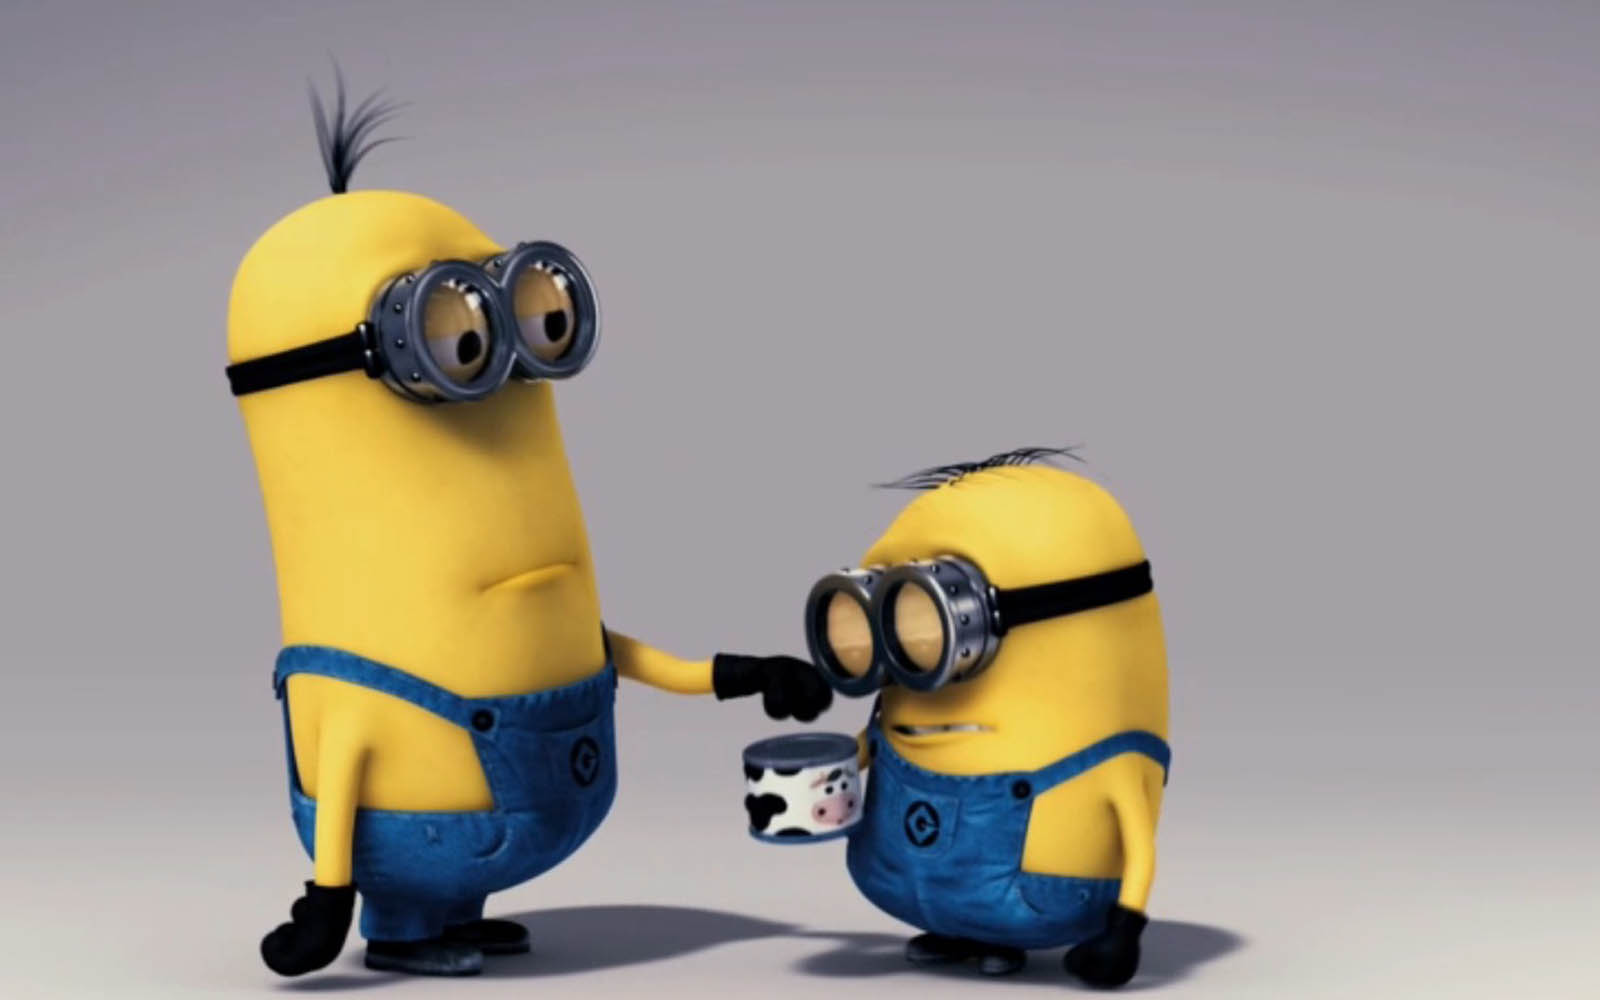 Cute Despicable Me Hd Minions Desktop Wallpapers - Short And Tall Things -  1600x1000 Wallpaper 